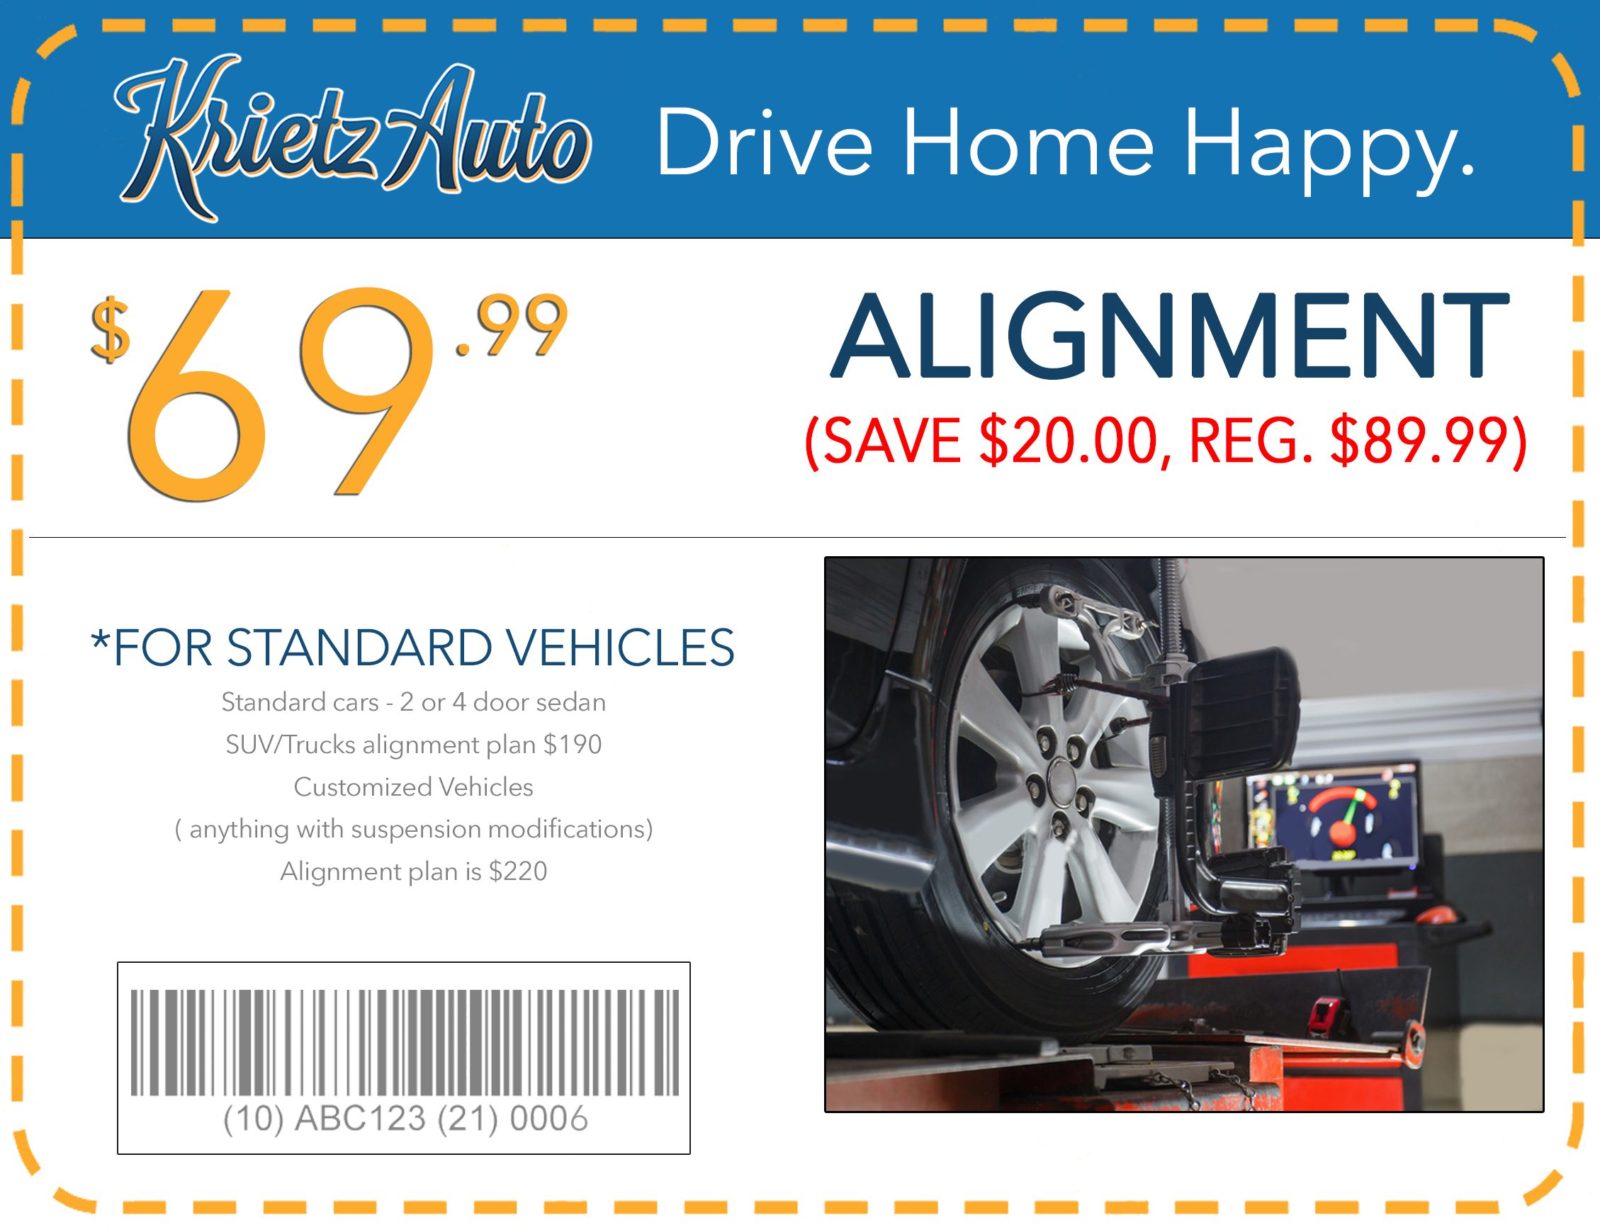 Vehicle Alignments In Frederick Maryland Krietz Auto